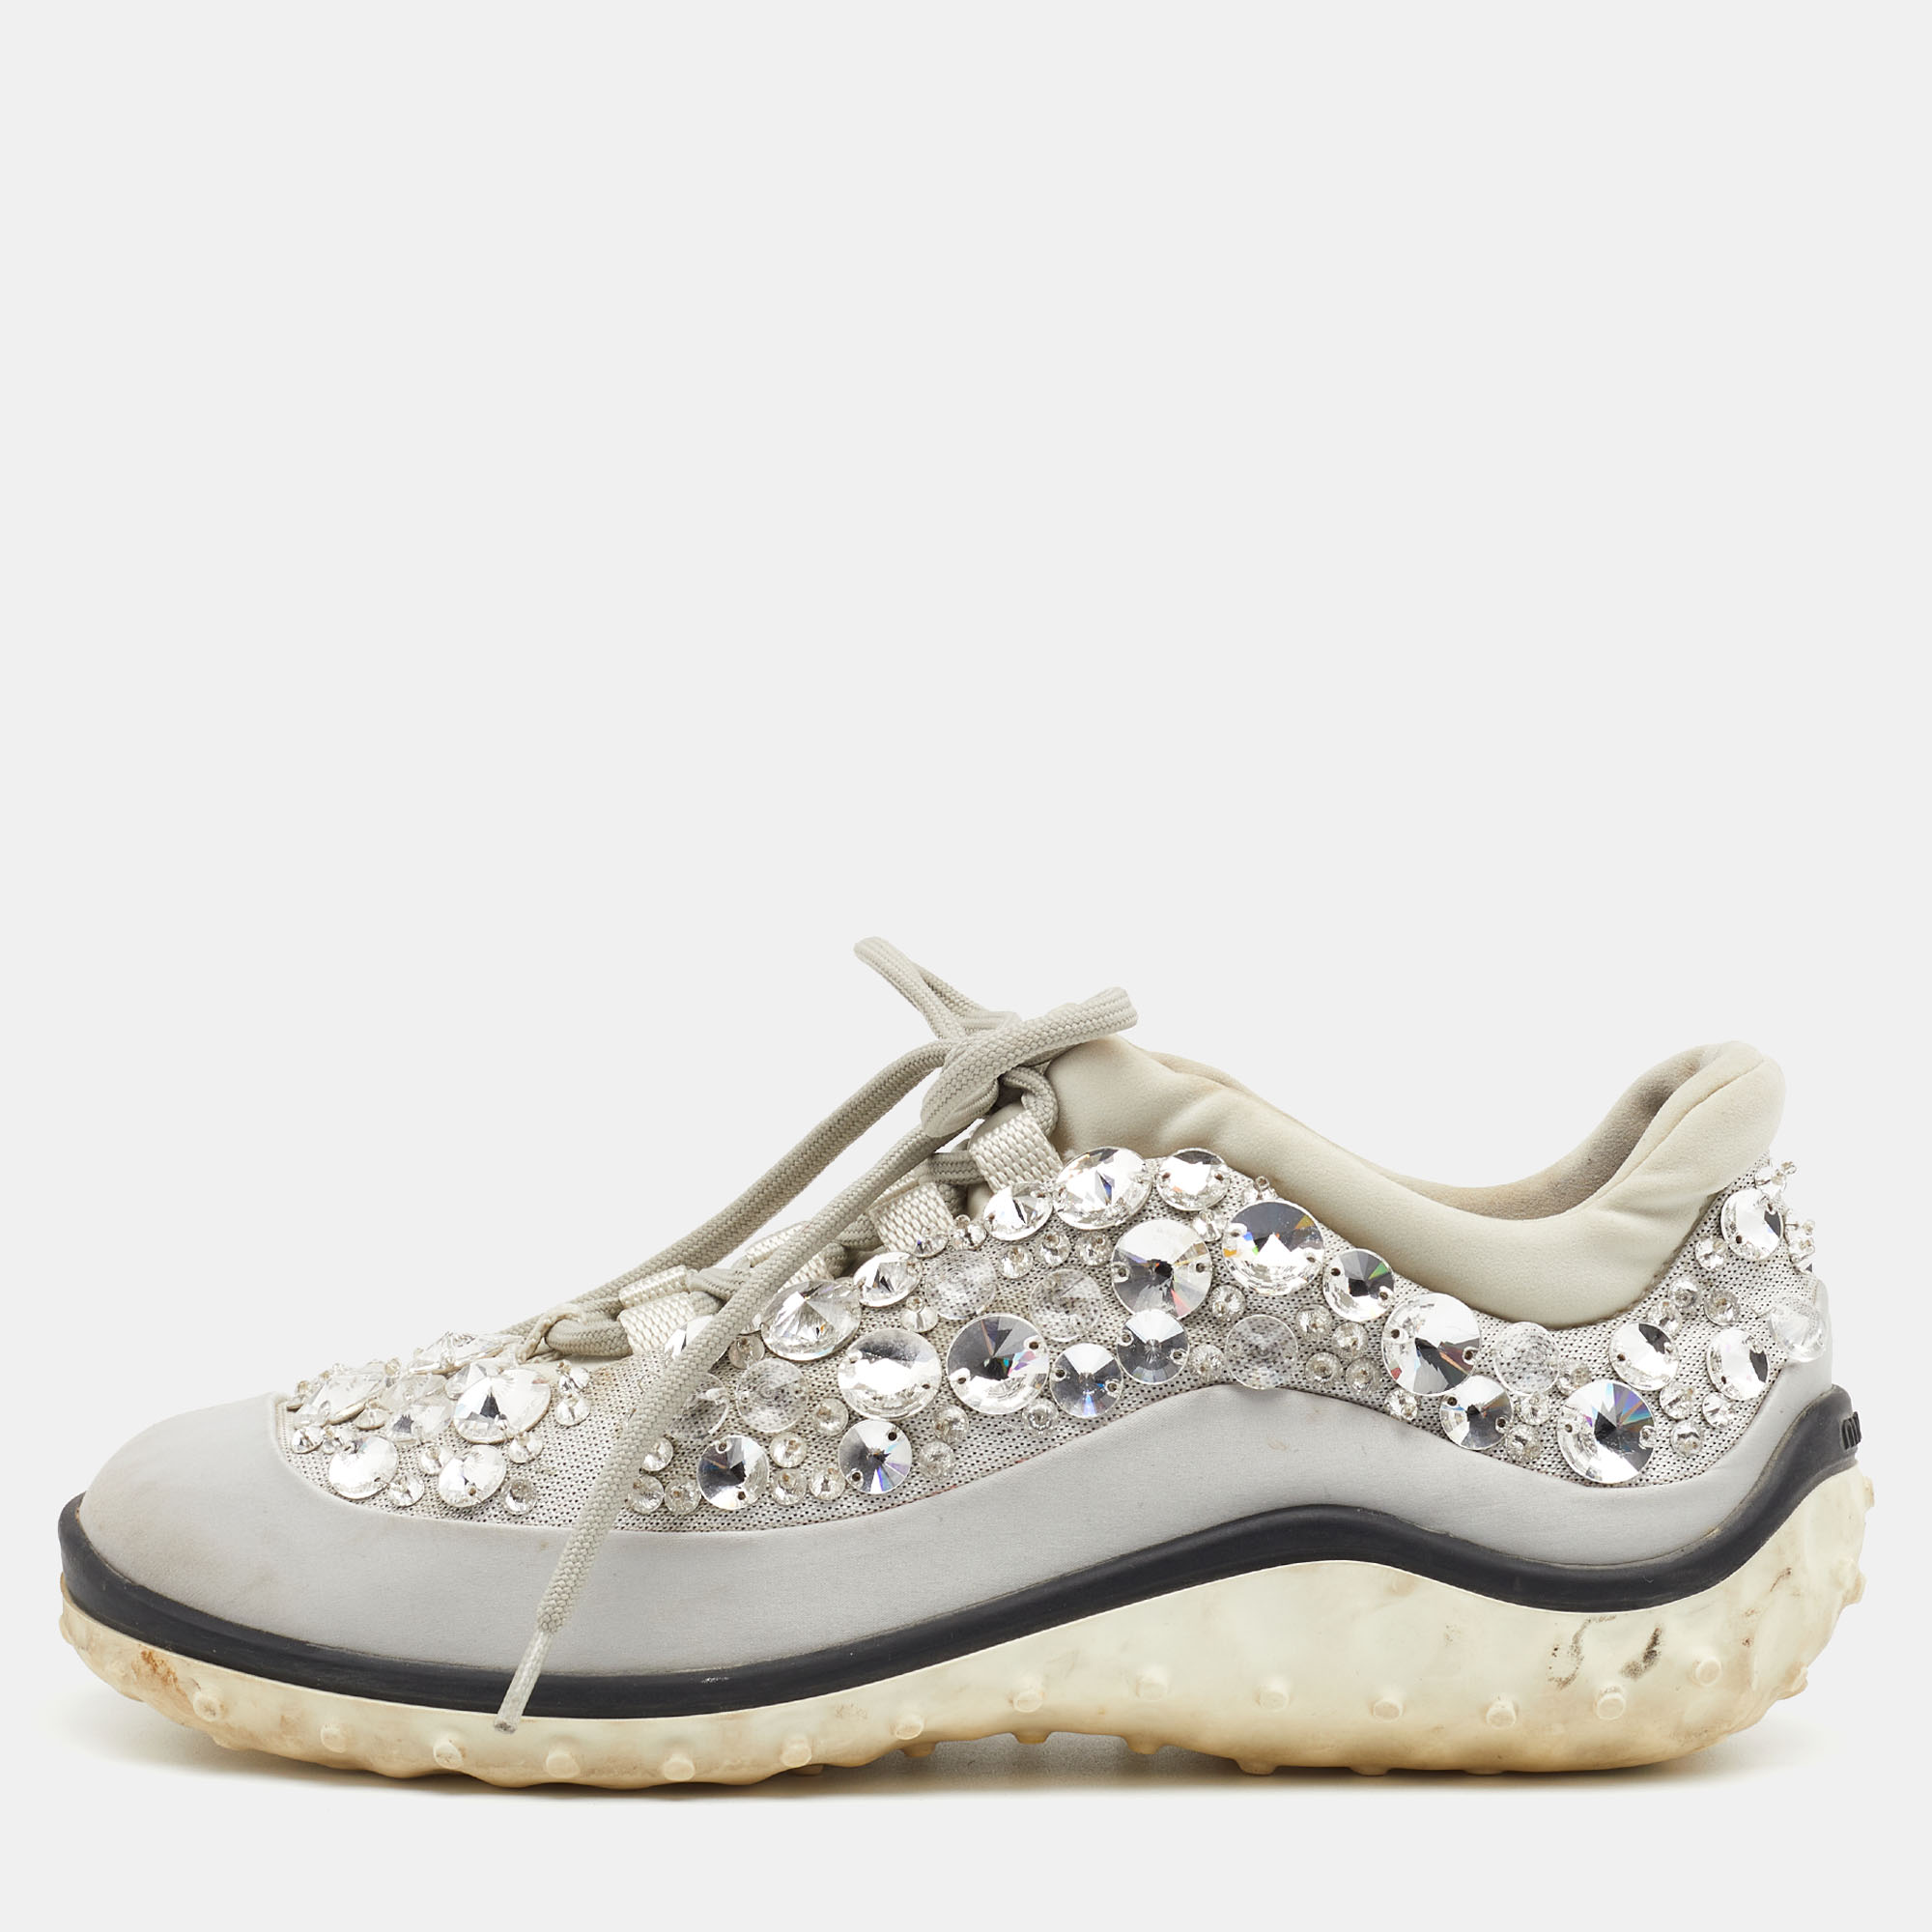 Miu miu grey satin and stretch fabric astro crystal embellished low top sneakers size 36